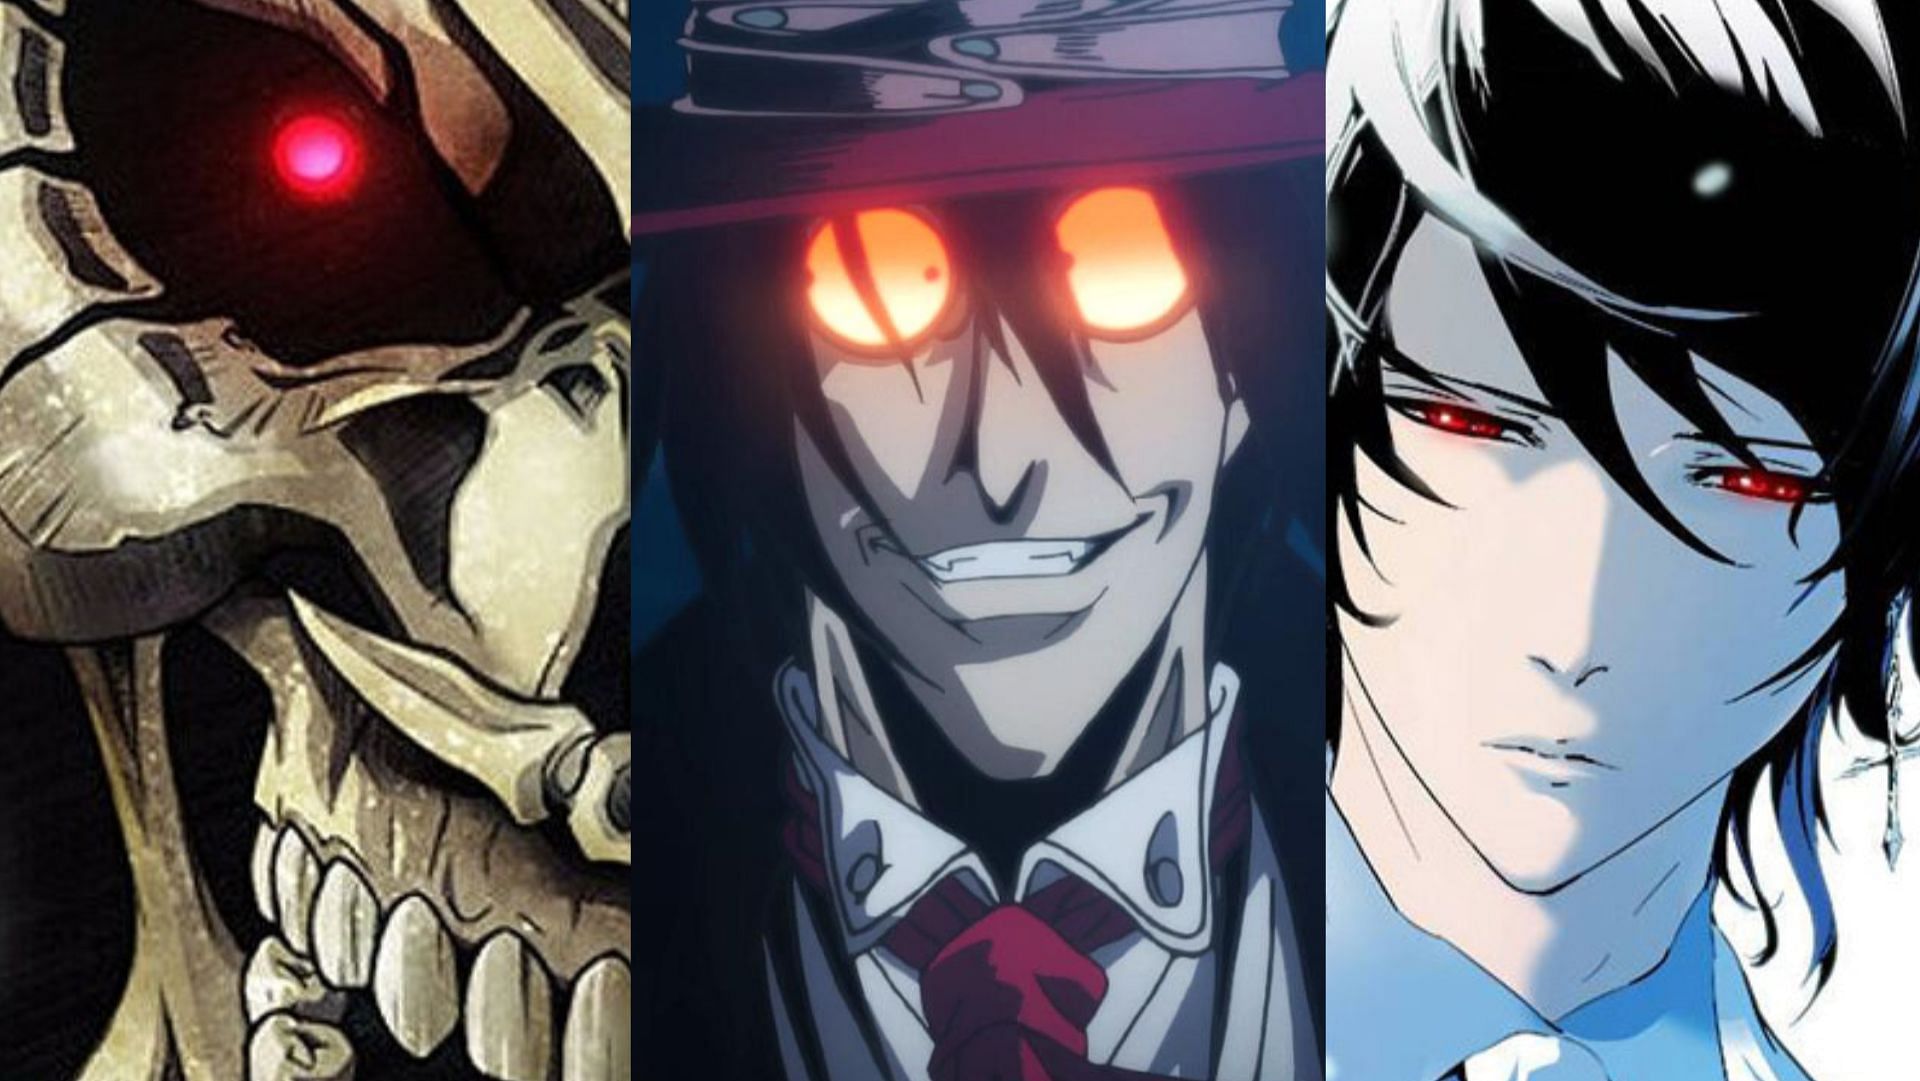 Top 10 Immortal Anime Characters  Articles on WatchMojocom